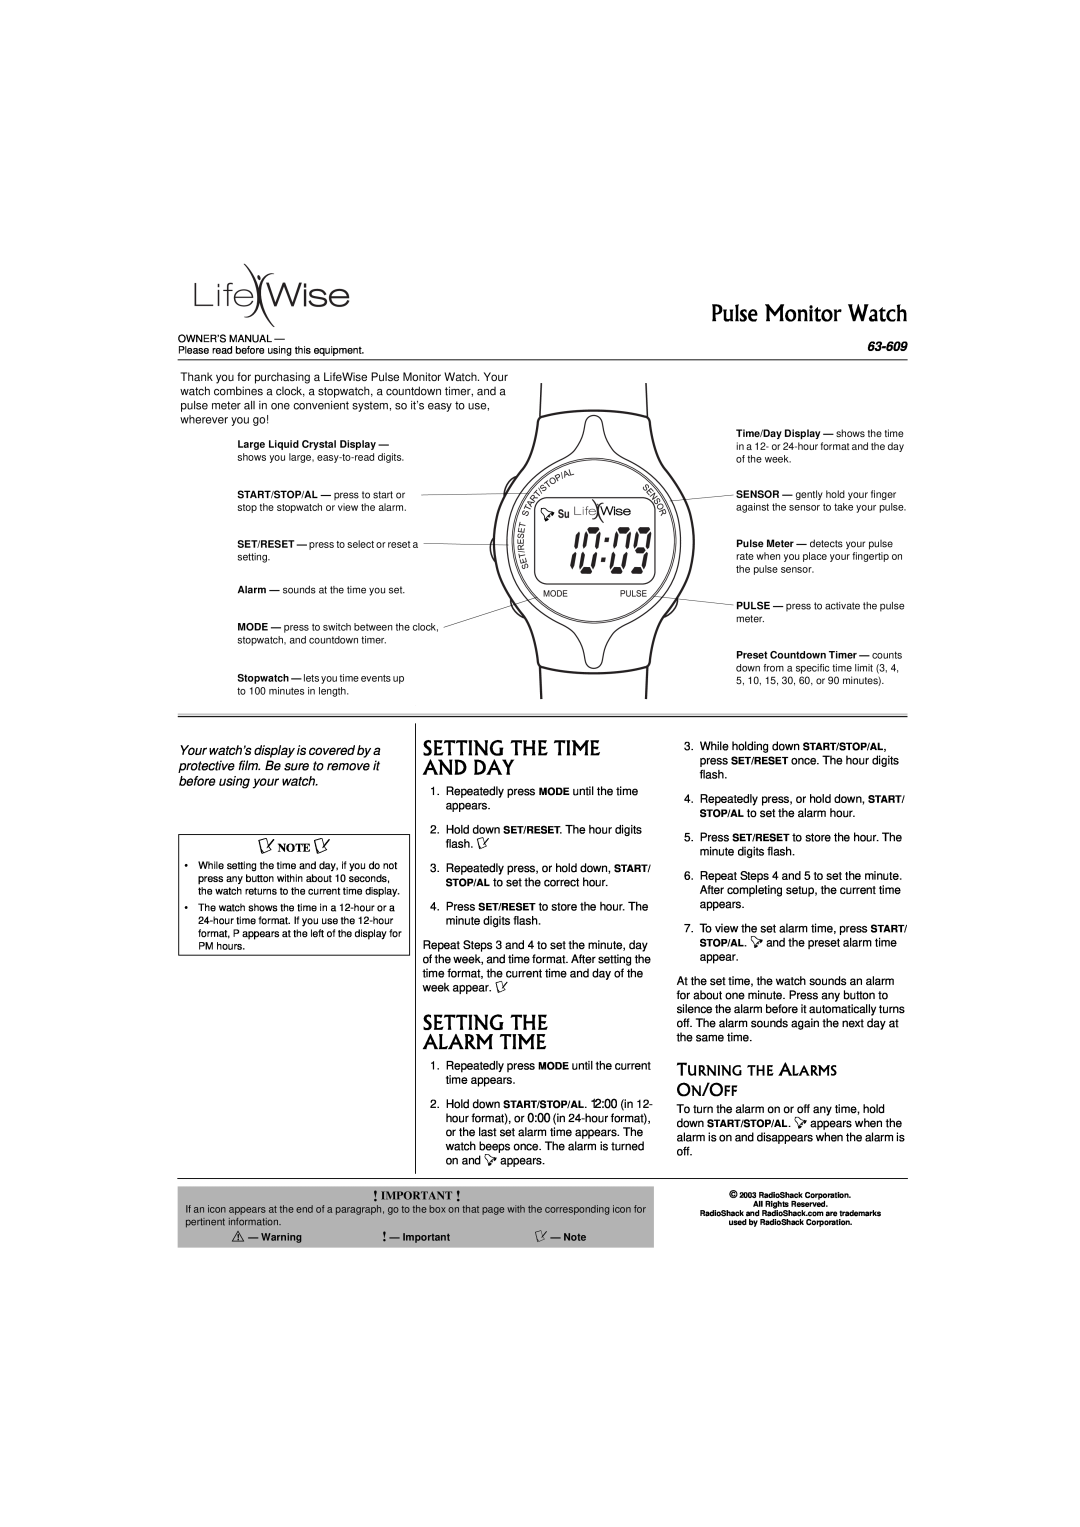 LifeWise 63-609 owner manual Setting The Time And Day, Setting The Alarm Time, Turning The Alarms, Ô Note Ô, On/Off 